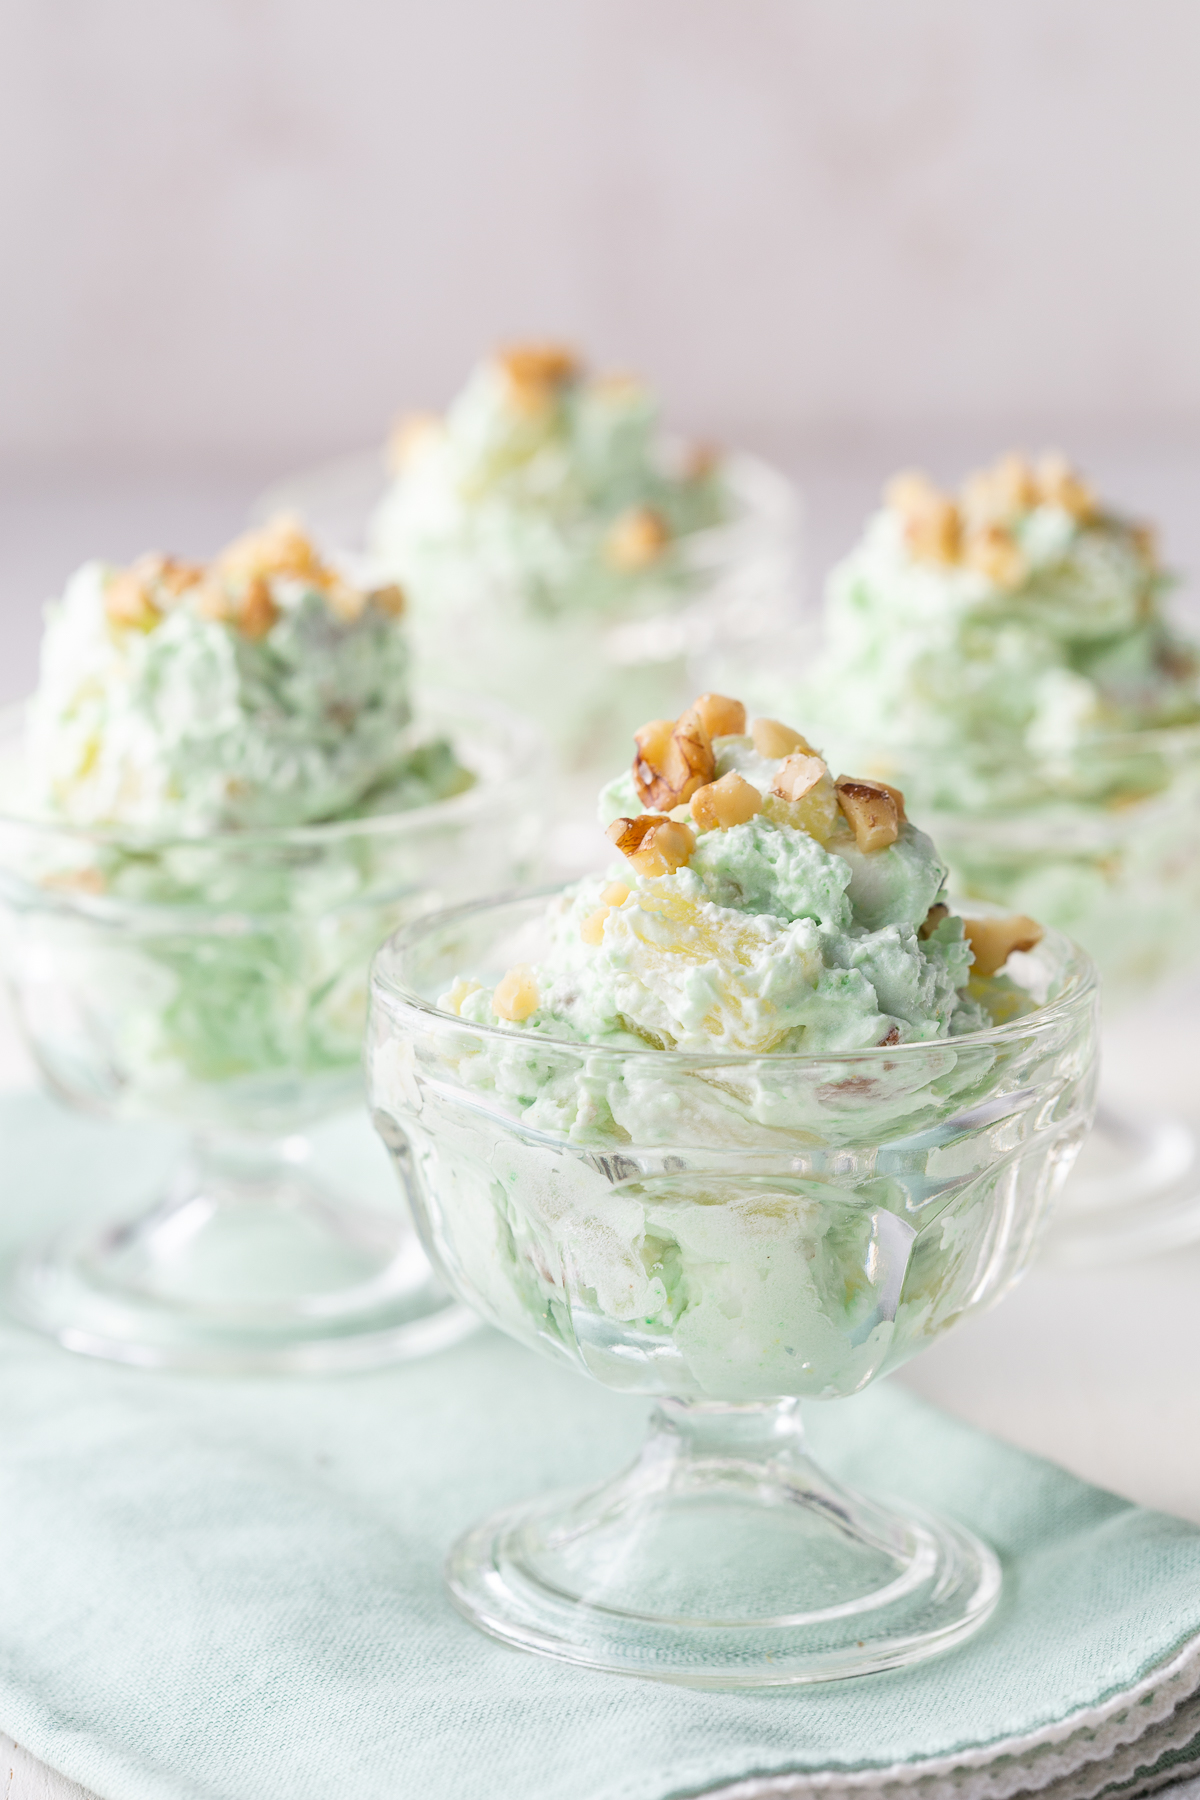 pistachio salad in mini parfait dishes, topped with chopped walnuts.